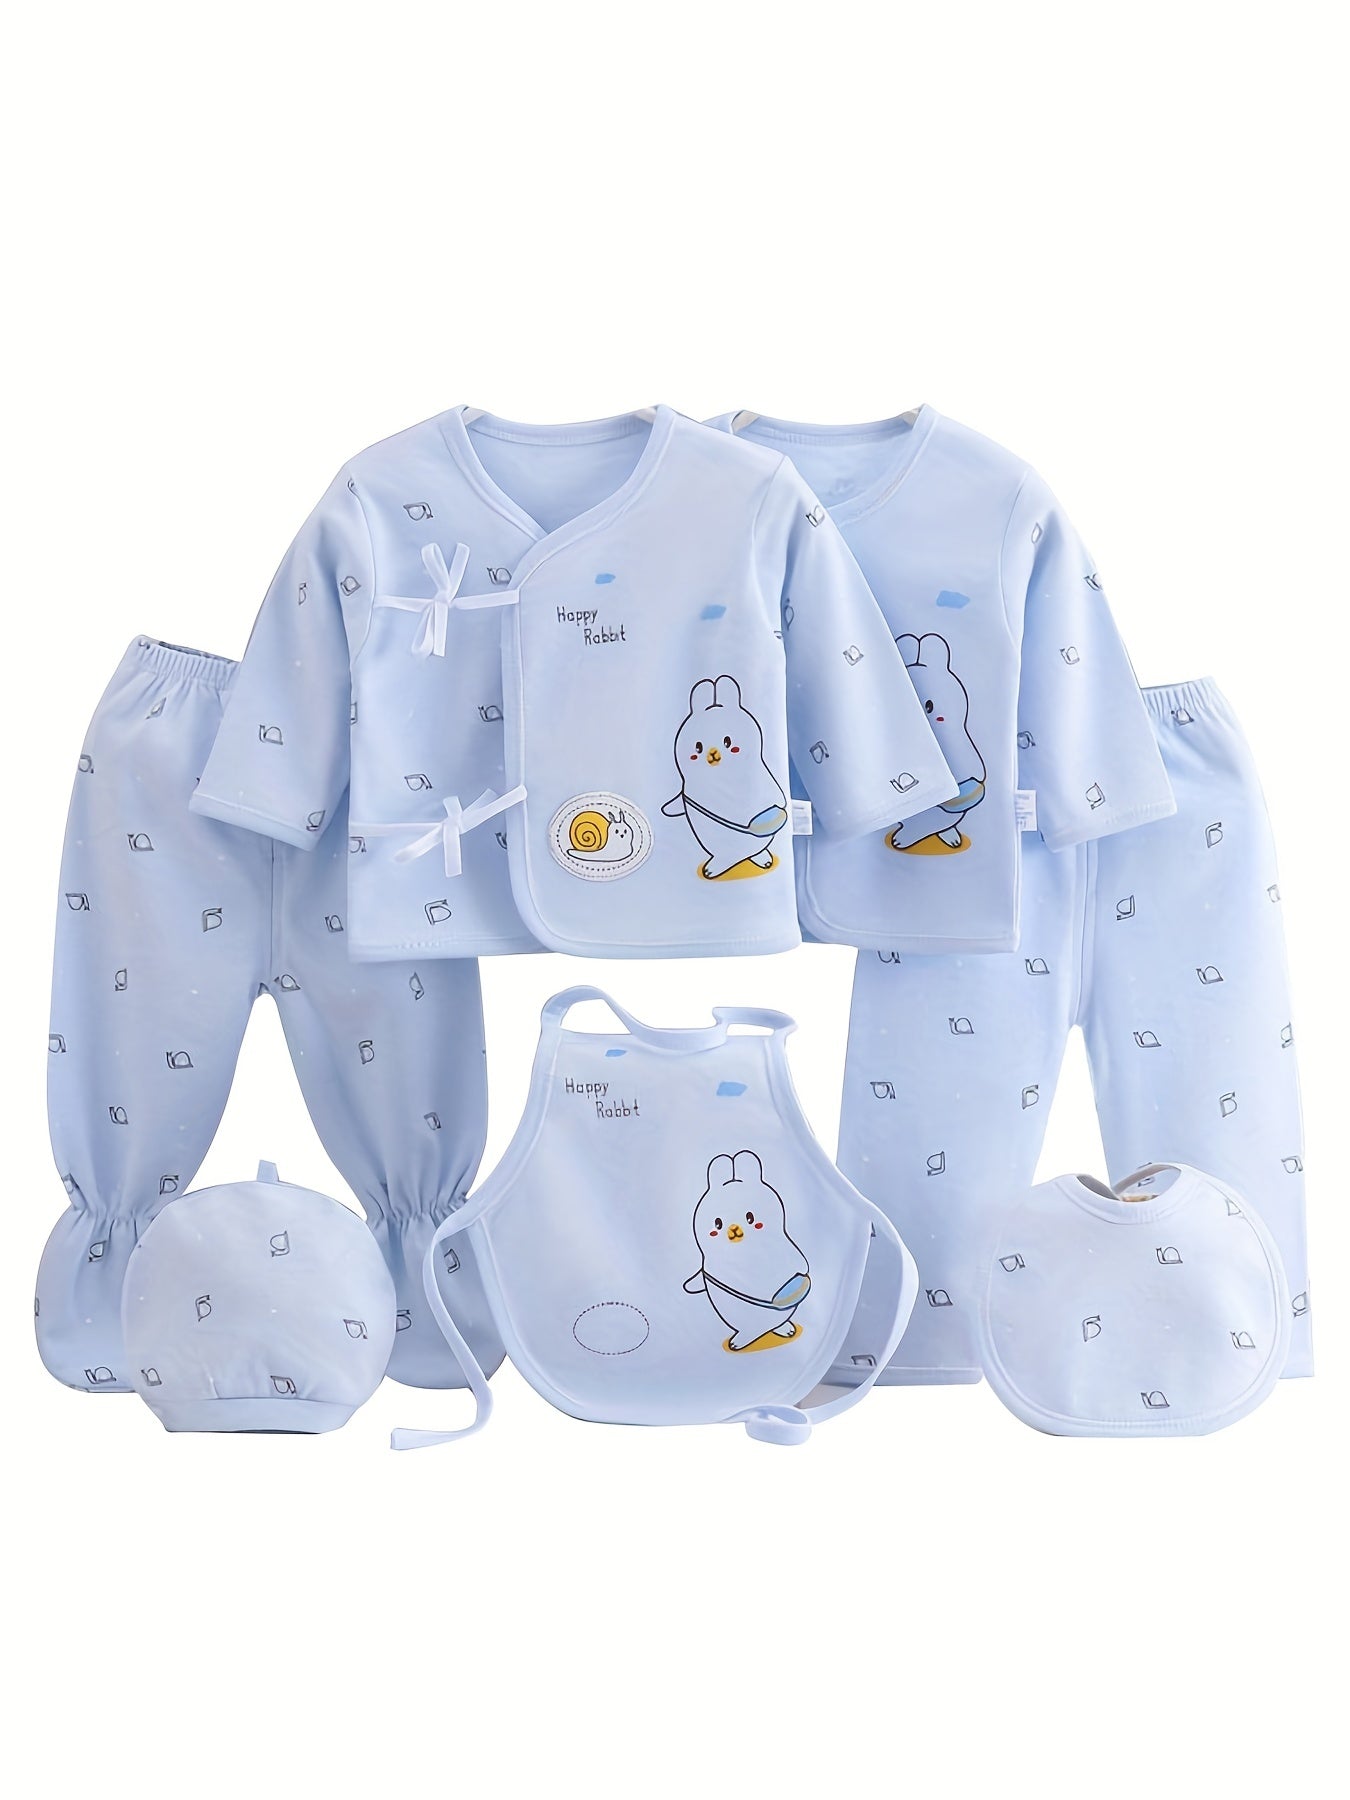 7pcs Newborn Comfort Set - Adorable Unisex Cotton Outfit with Footed Pants, Cardigan, Top, Trousers, Hat, Bib - Perfect Gift for Baby Showers - Ammpoure Wellbeing